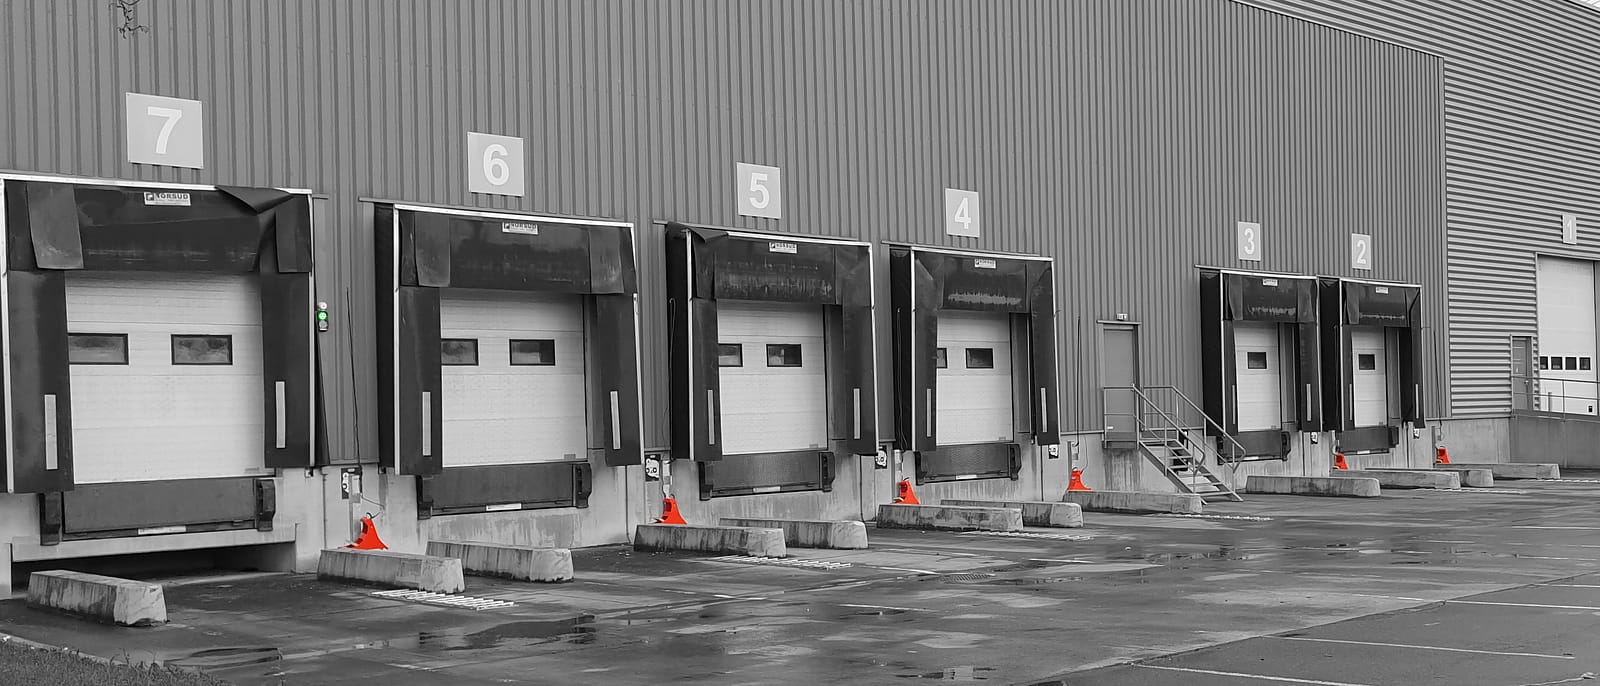 Loading dock equipped with POWERCHOCK 3